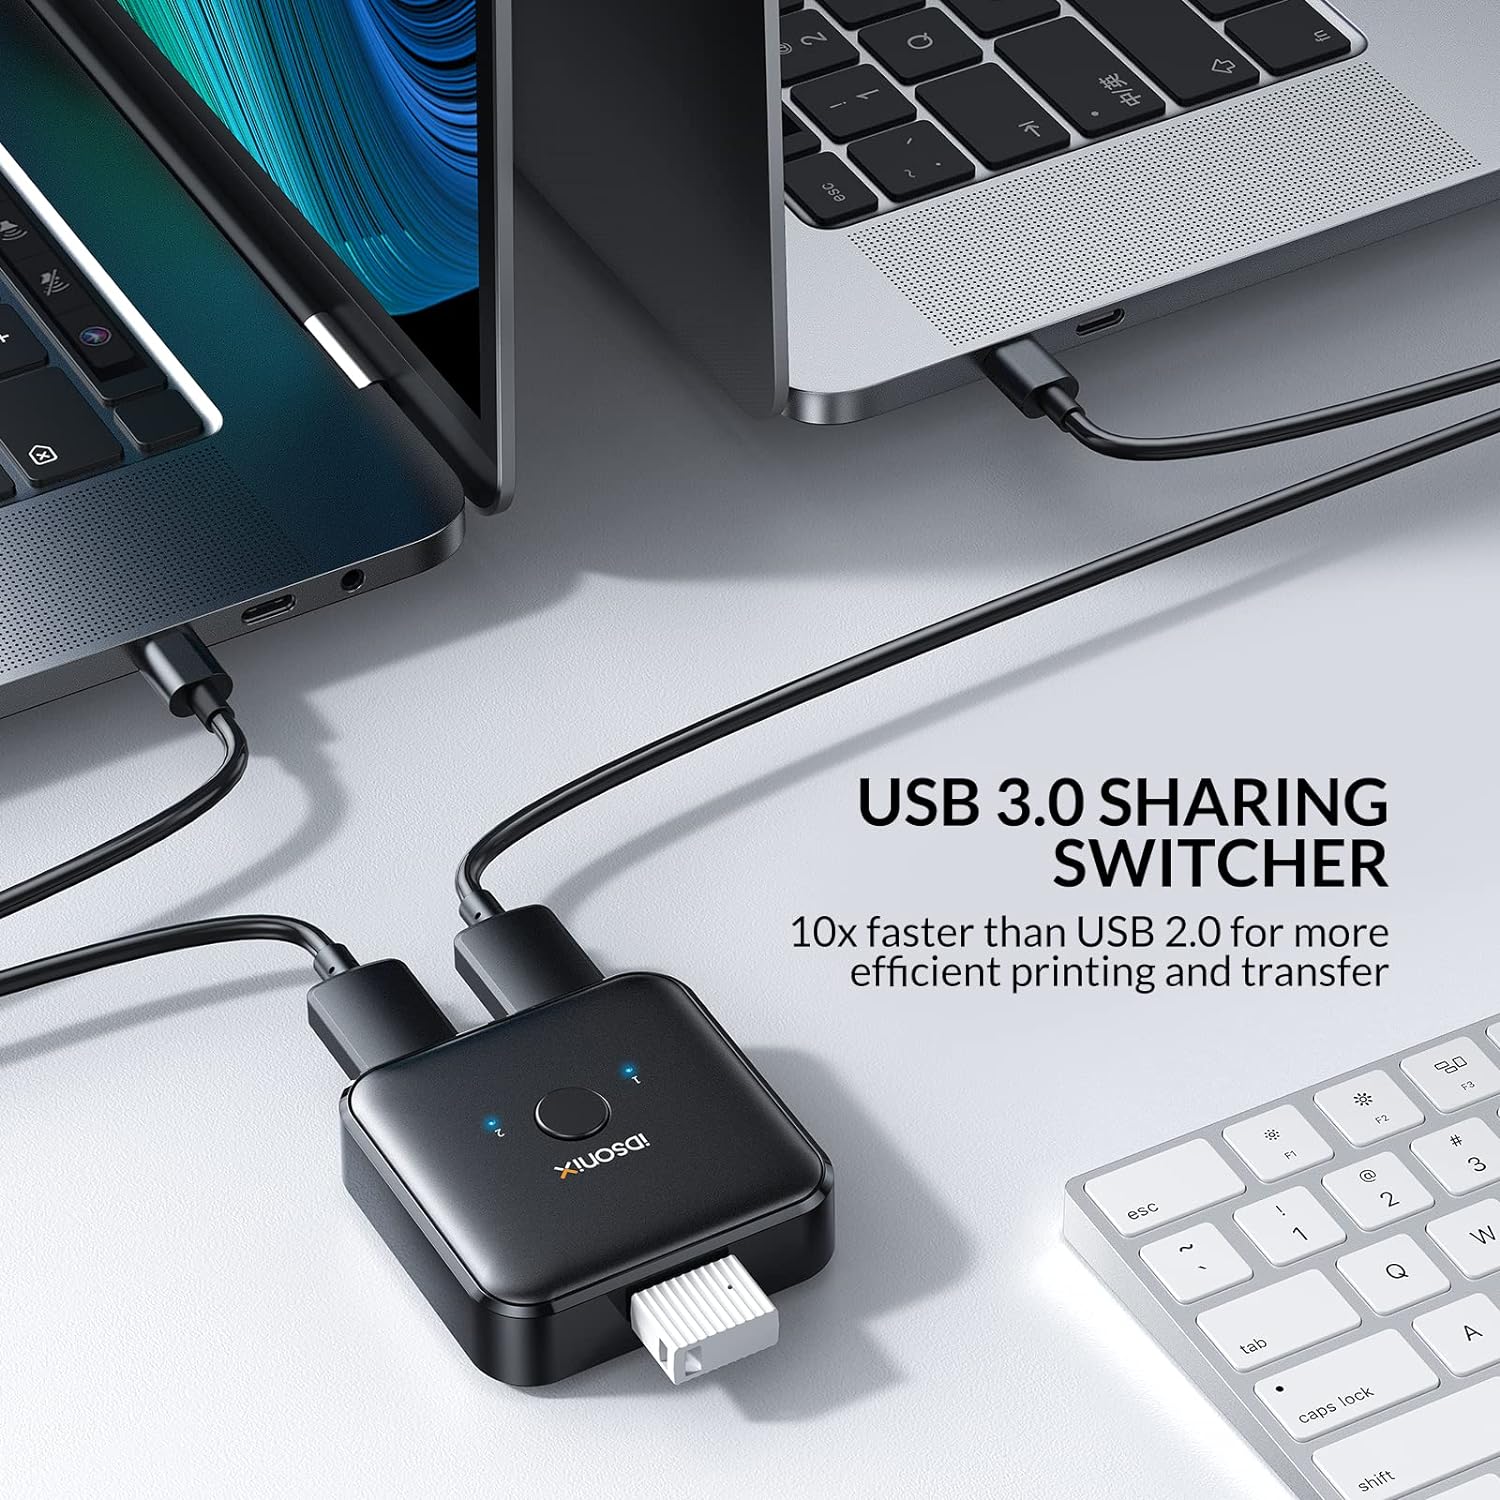 USB 3.0 Switch Selector,iDsonix USB Switcher 1 in 2 Out(2 in 1 Out) Bi-Directional,USB Switch 2 Computers Share 1 Device for Printer,Scanner,Keyboard, USB Sharing Switch with 2pcs A to A 3.3ft Cables